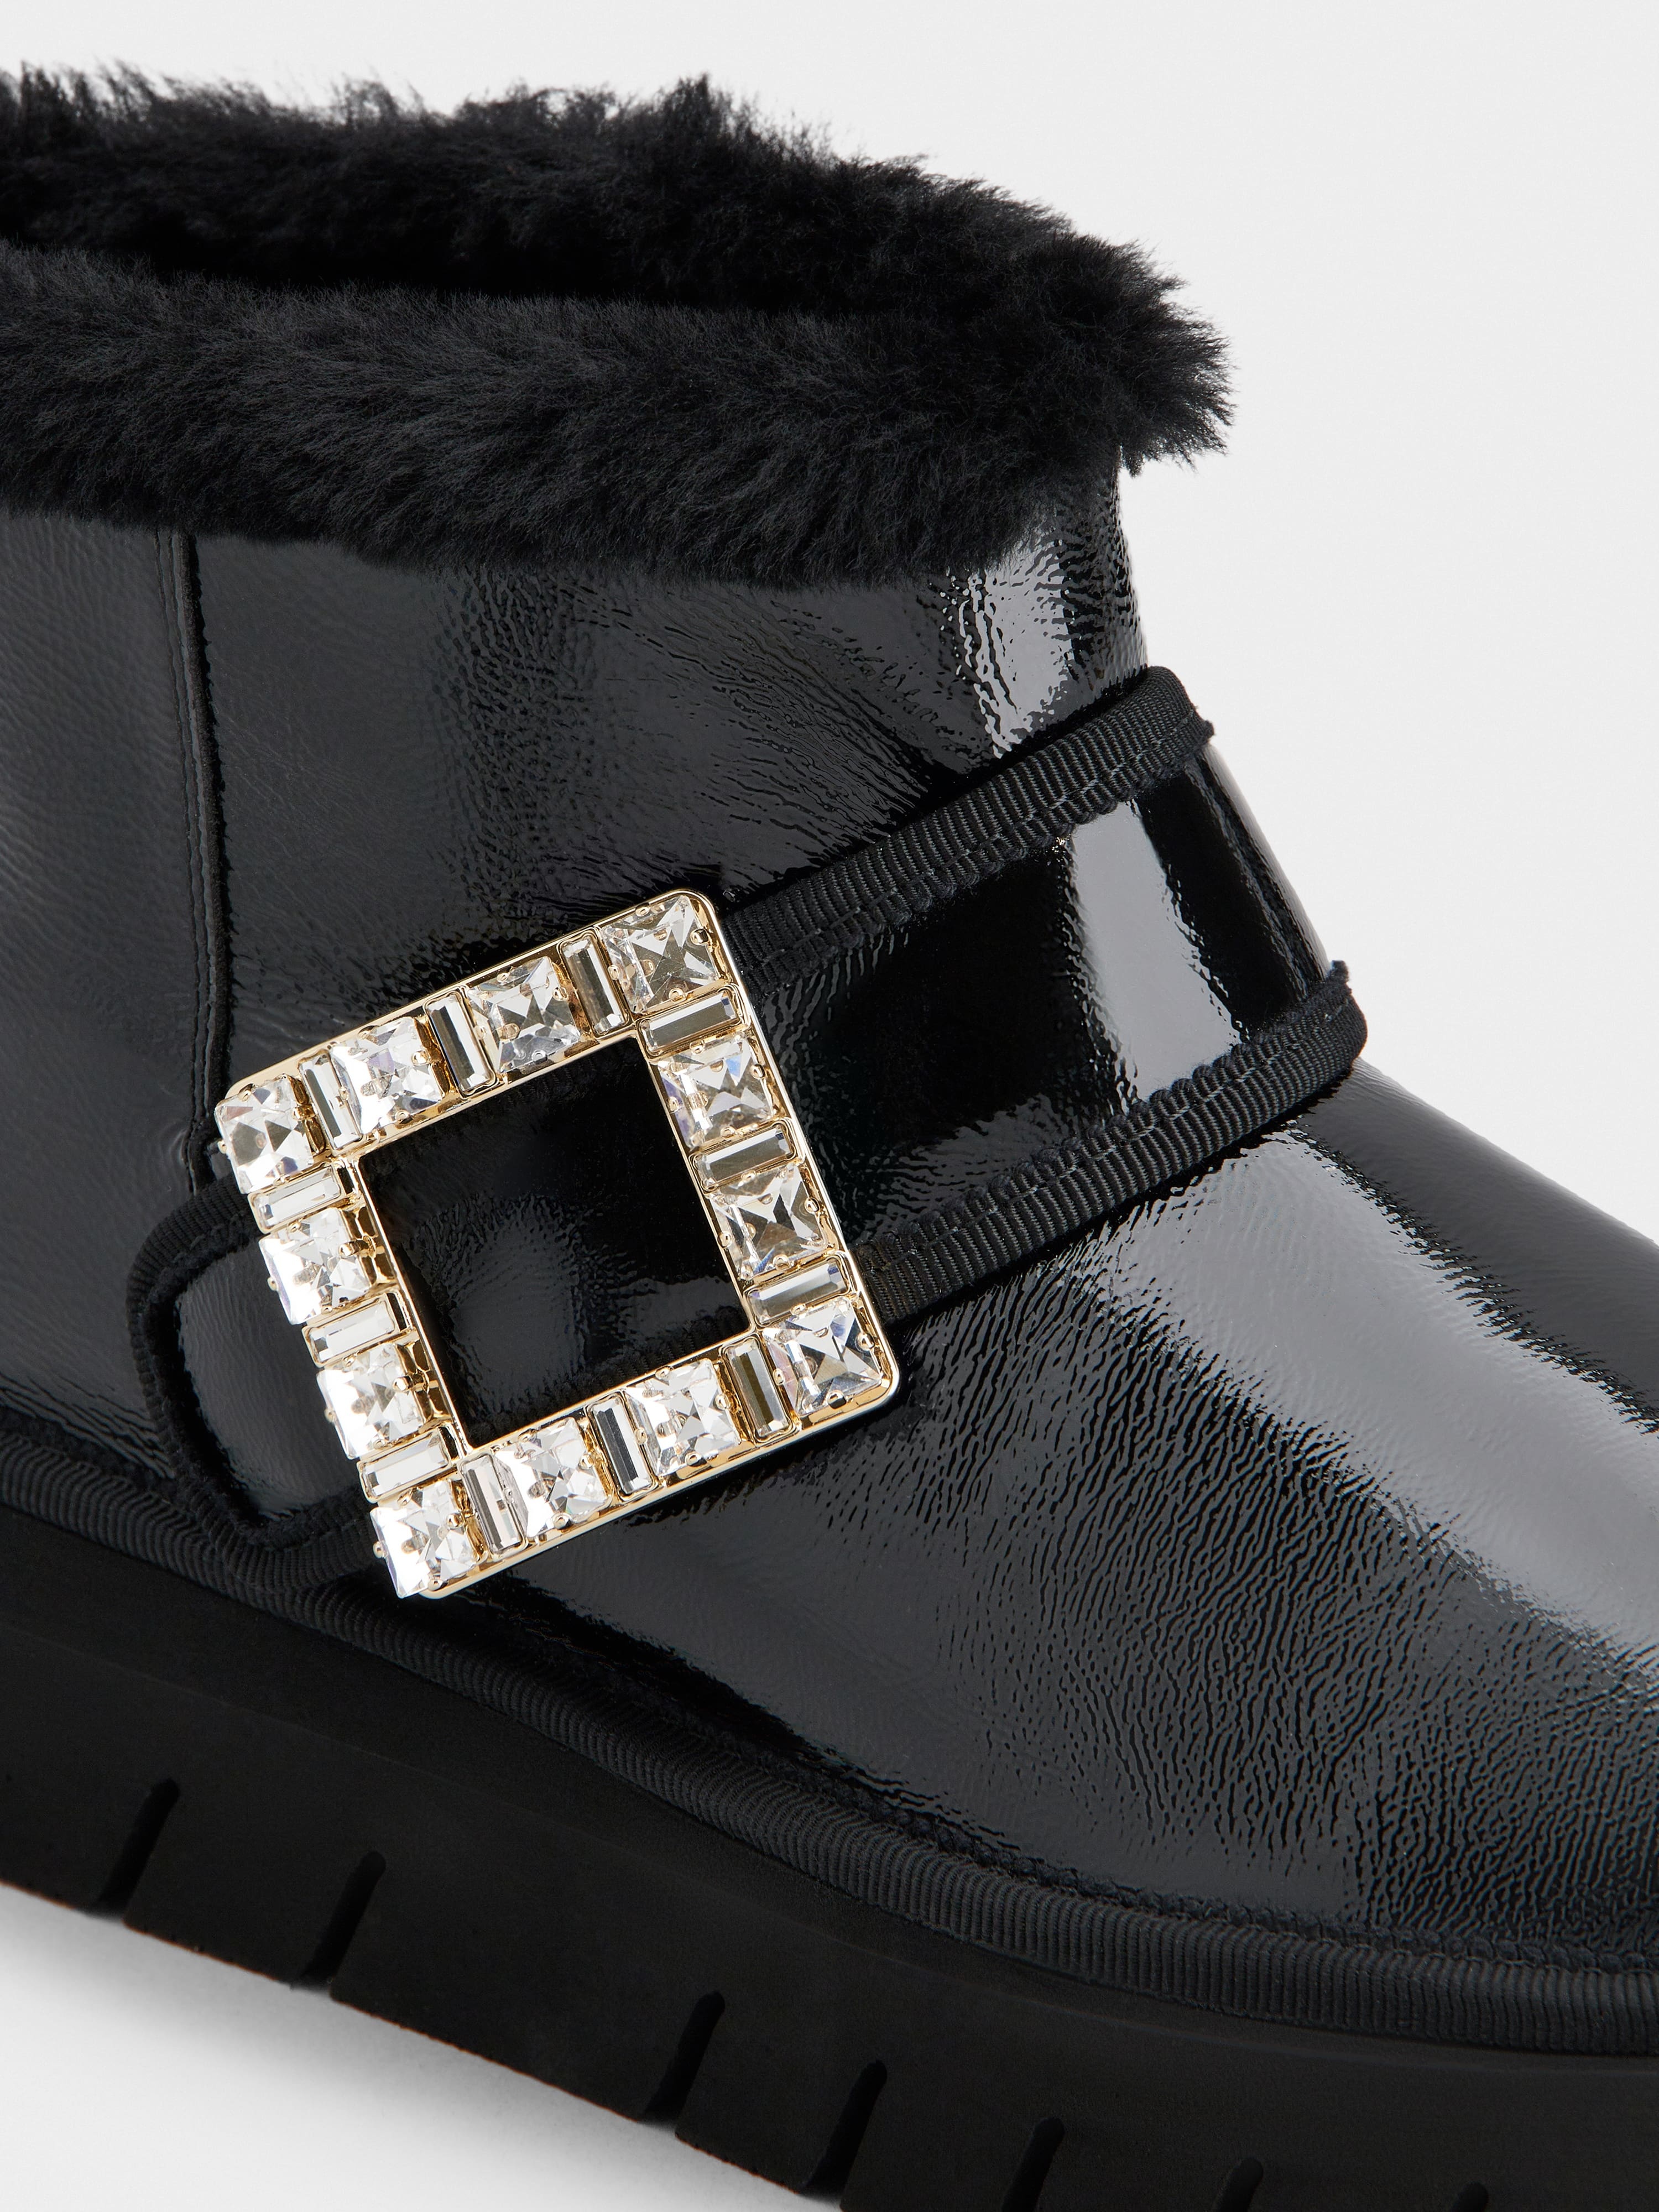 Viv' Winter Fur Strass Buckle Ankle Boots in Patent Leather - 3